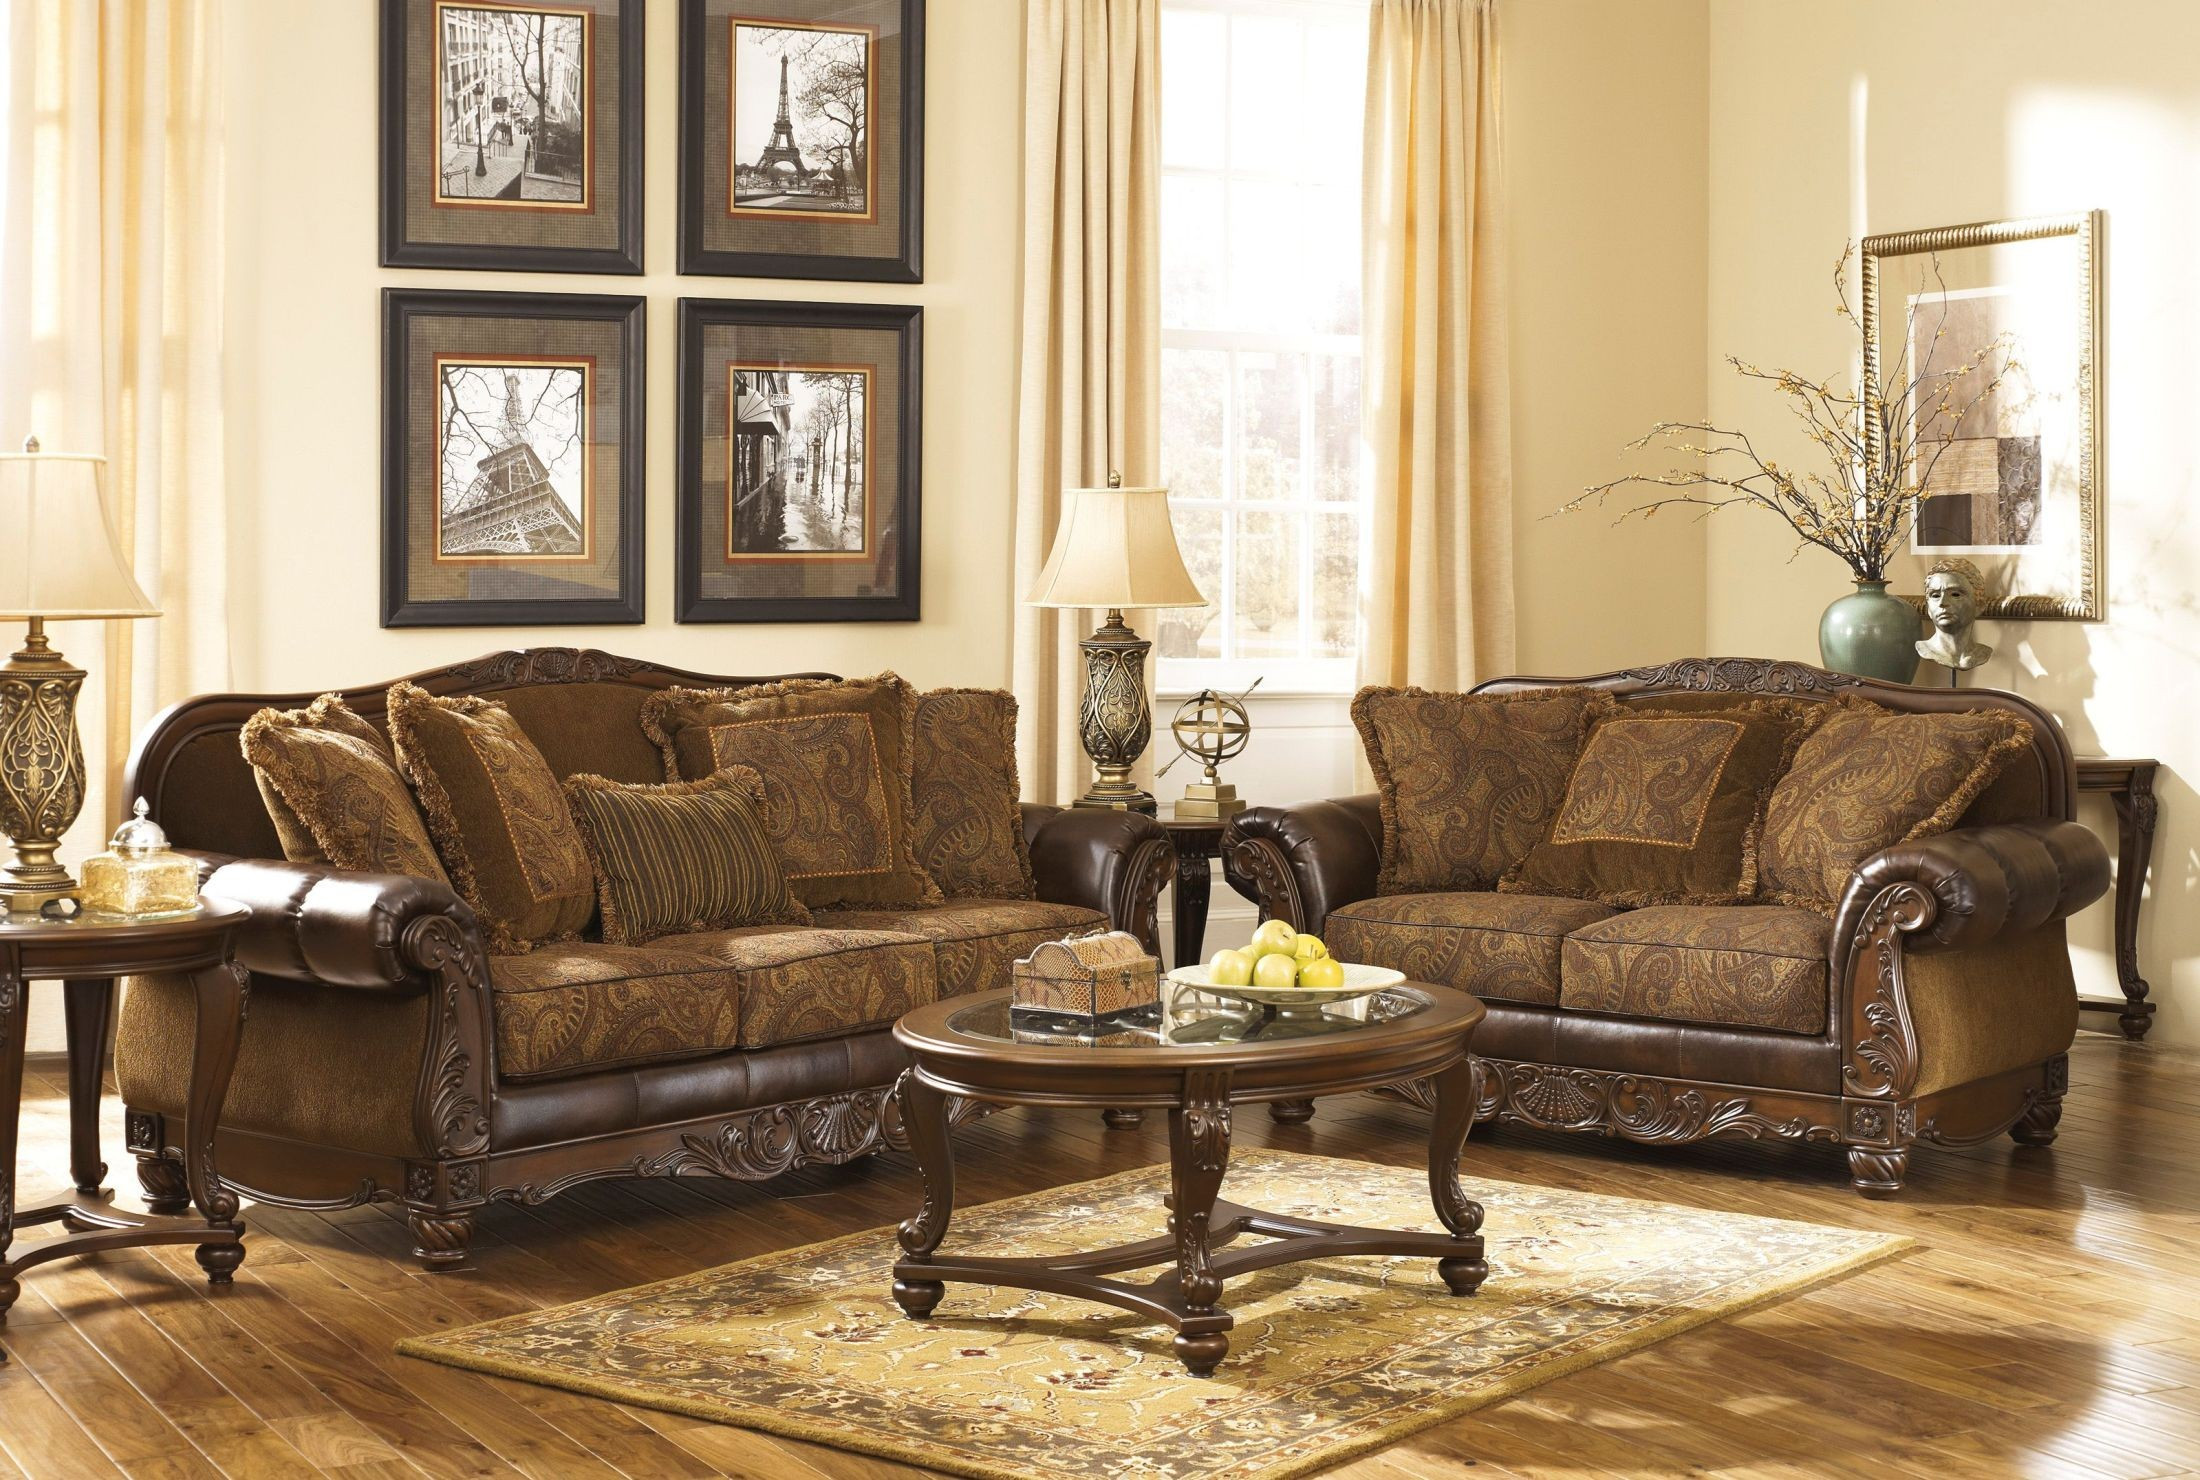 Ashley Furniture Living Room Chairs
 Fresco DuraBlend Antique Living Room Set from Ashley